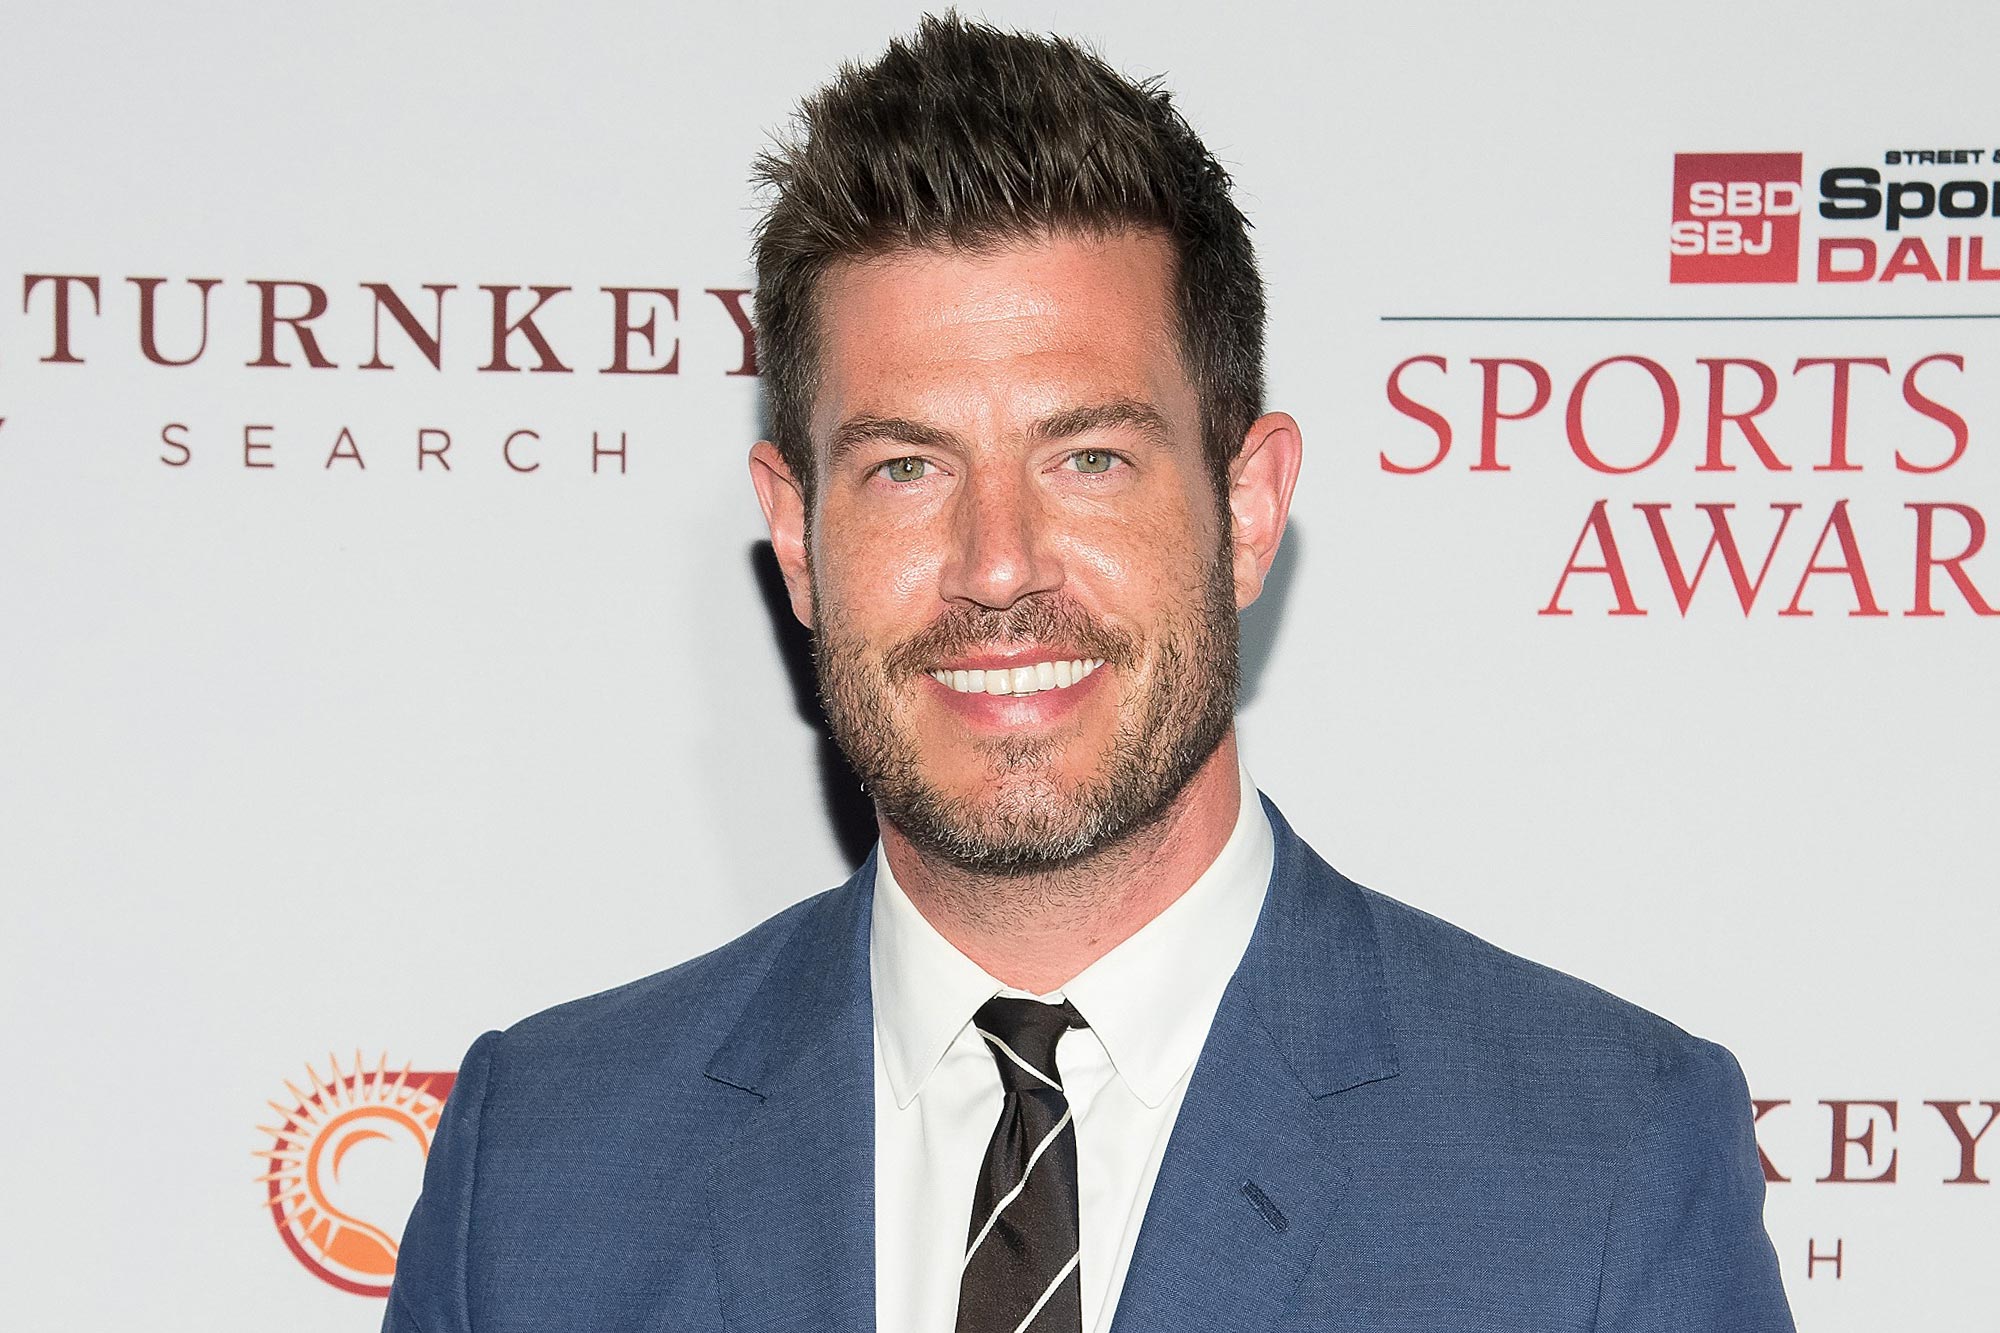 how old is jesse palmer